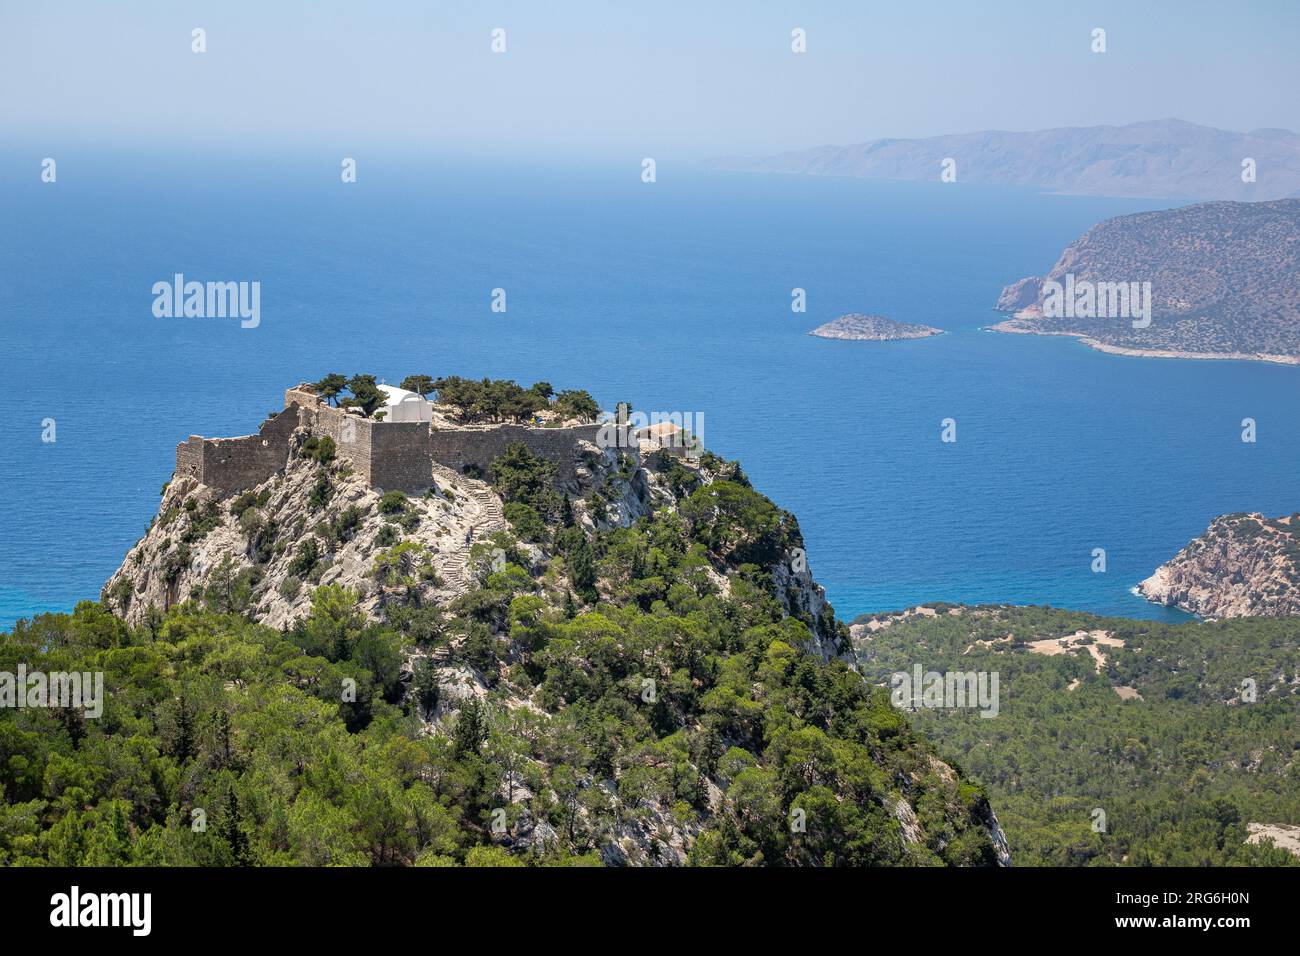 The ruins of the Venetian castle built in 1480 at Monolithos in Rhodes, Greece Stock Photo